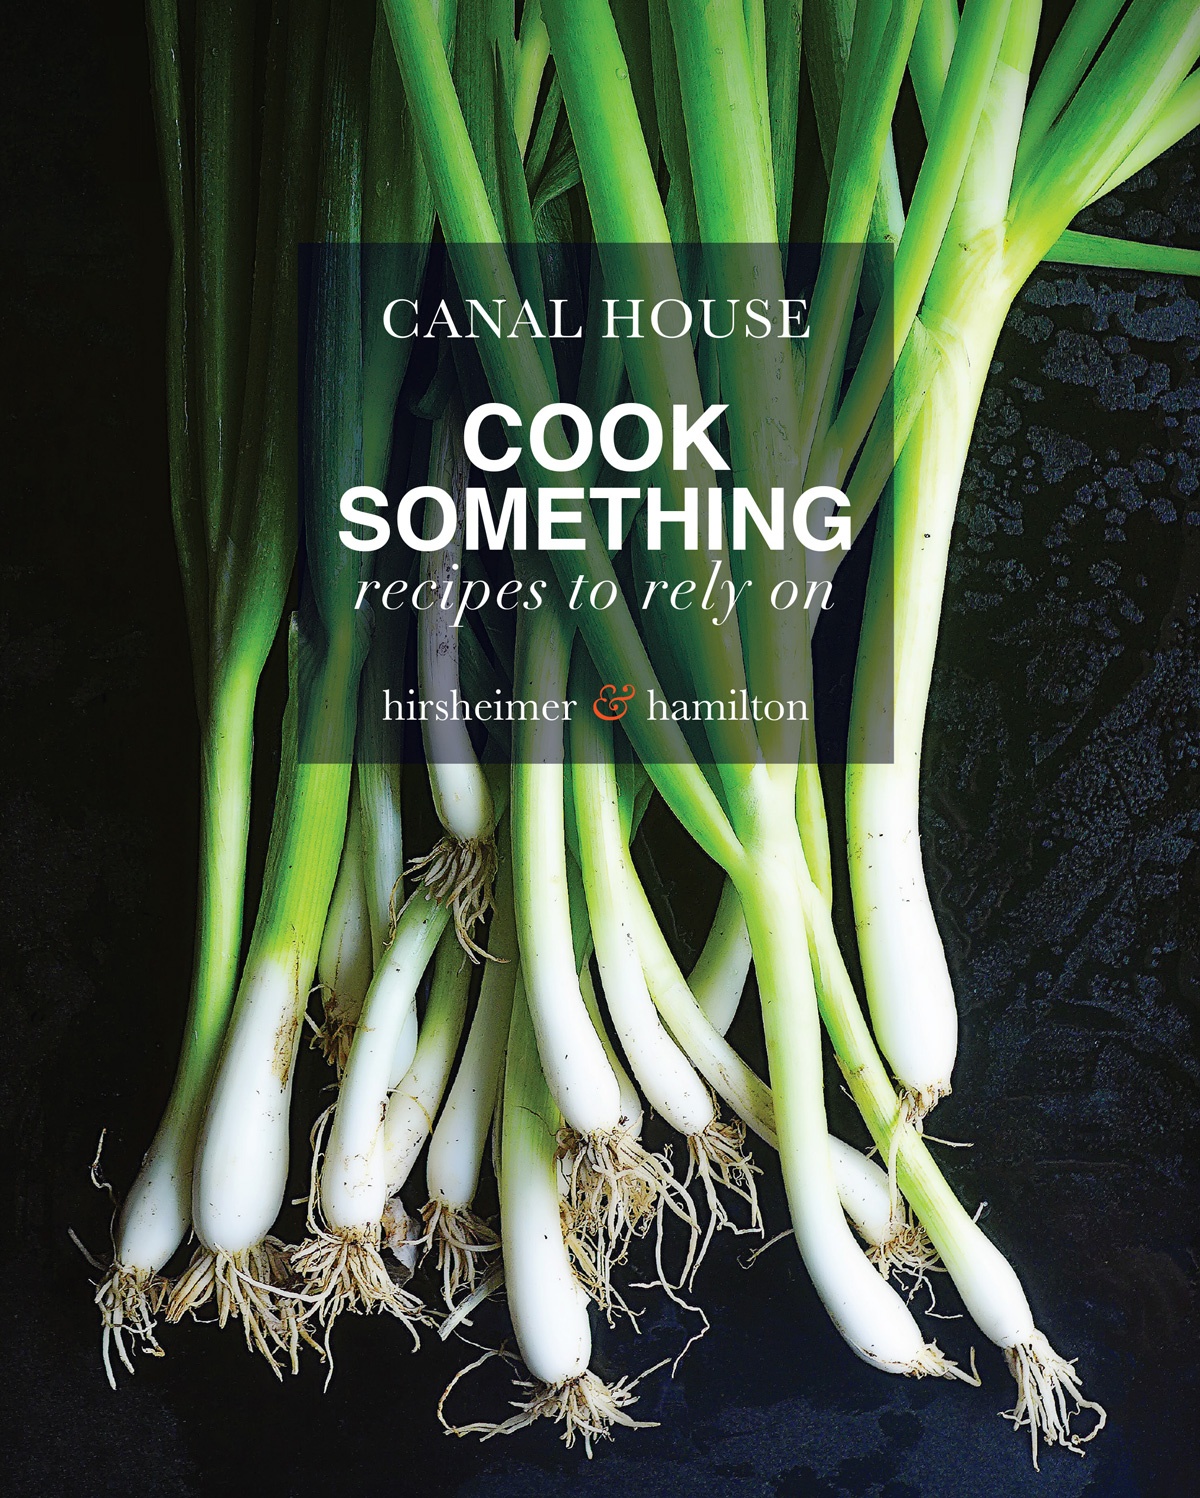 Book cover of Canal House: Cook Something by Christopher Hirsheimer and Melissa Hamilton